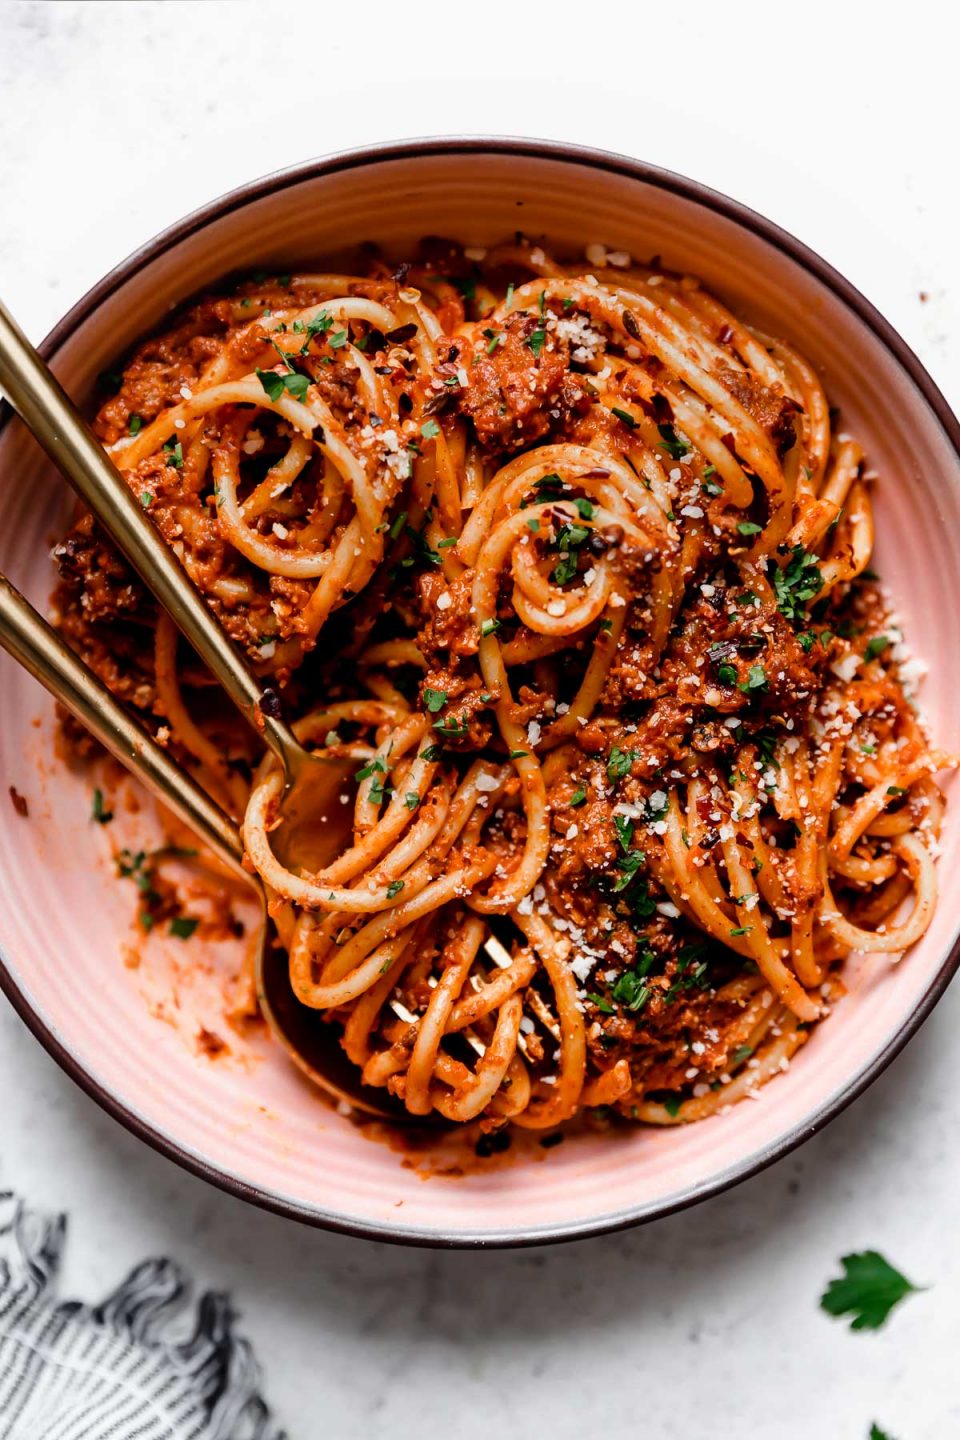 Bolognese sauce tossed into bucatini noodles, served in a pink pasta bowl with gold flatware. The pasta bolognese is topped with grated cheese, chopped parsley, & crushed red pepper flakes.